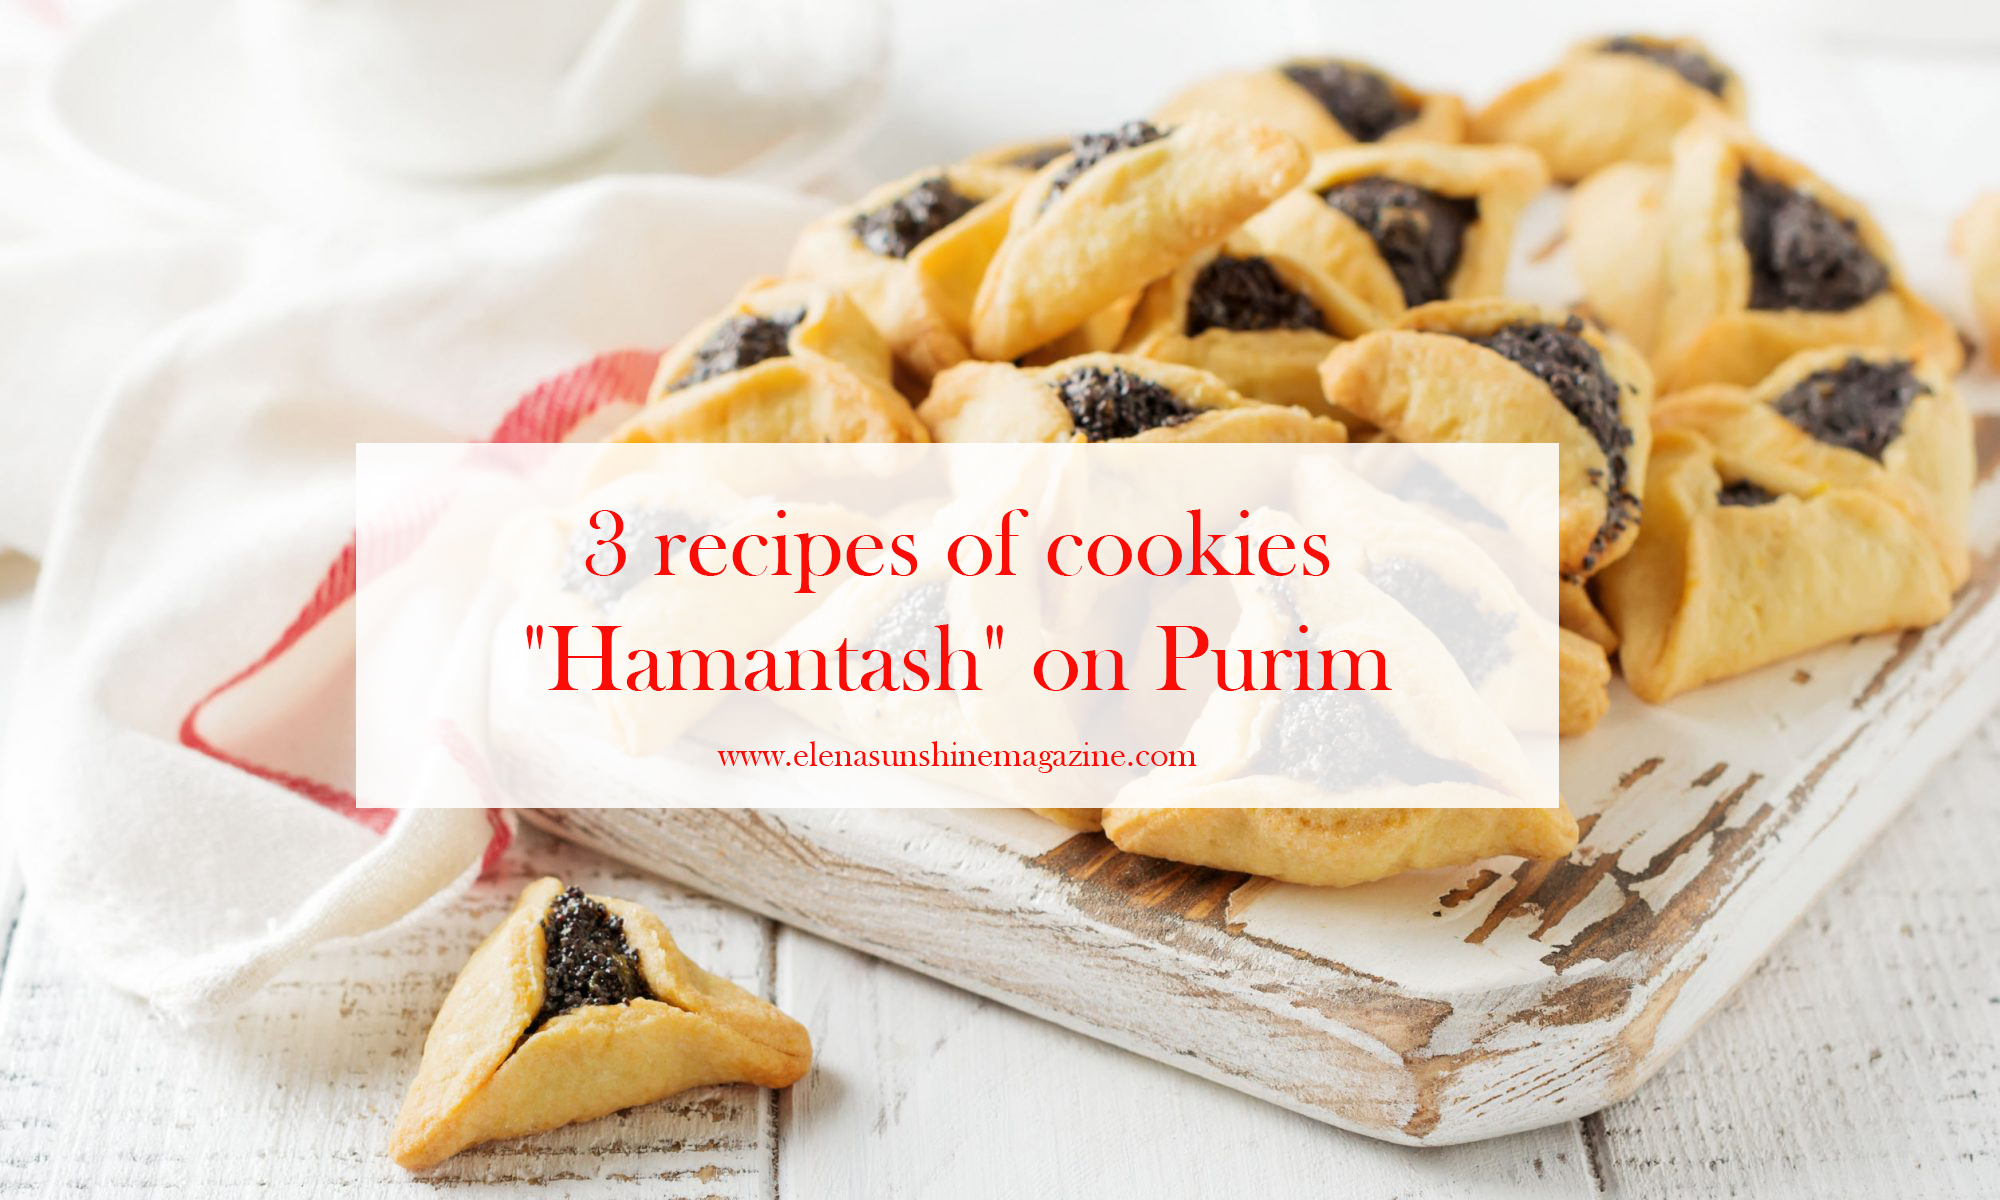 Recipes purim food Web abounds